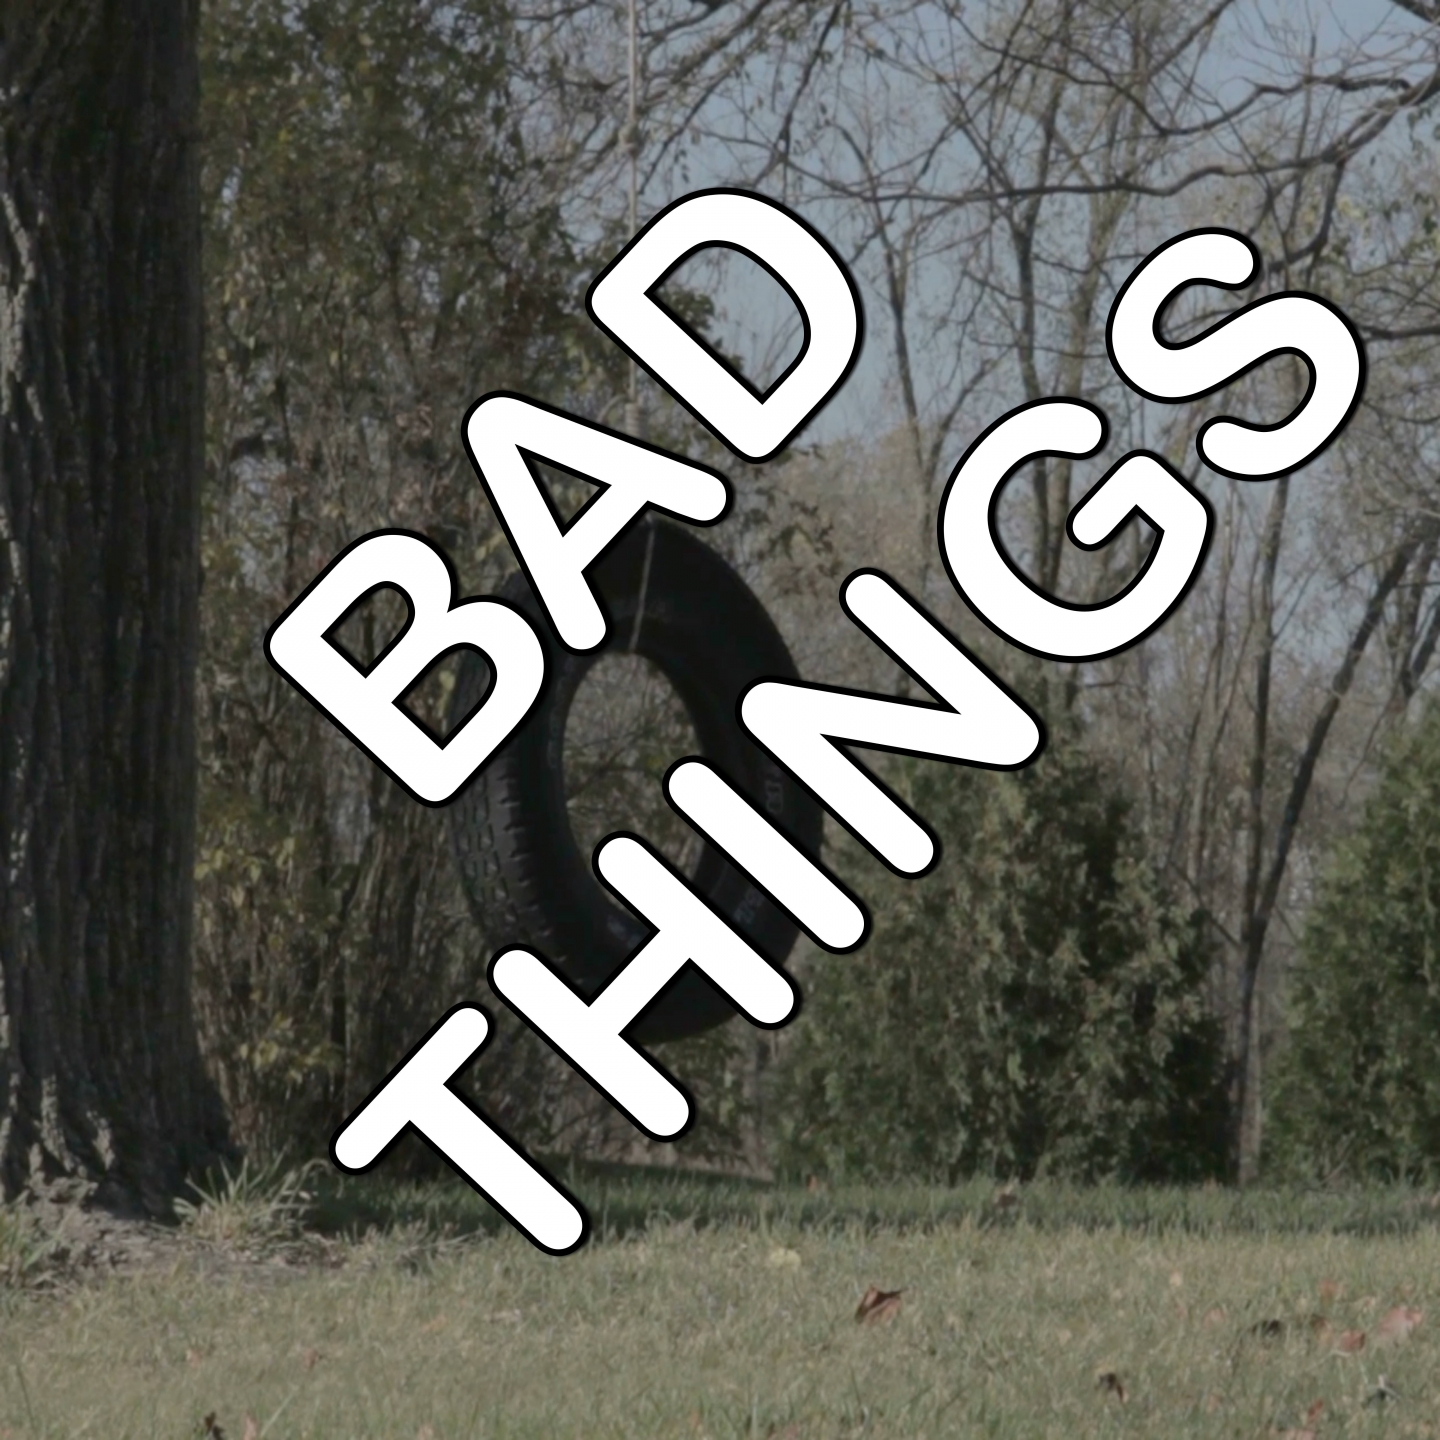 Bad Things - Tribute to Machine Gun Kelly and Camila Cabello